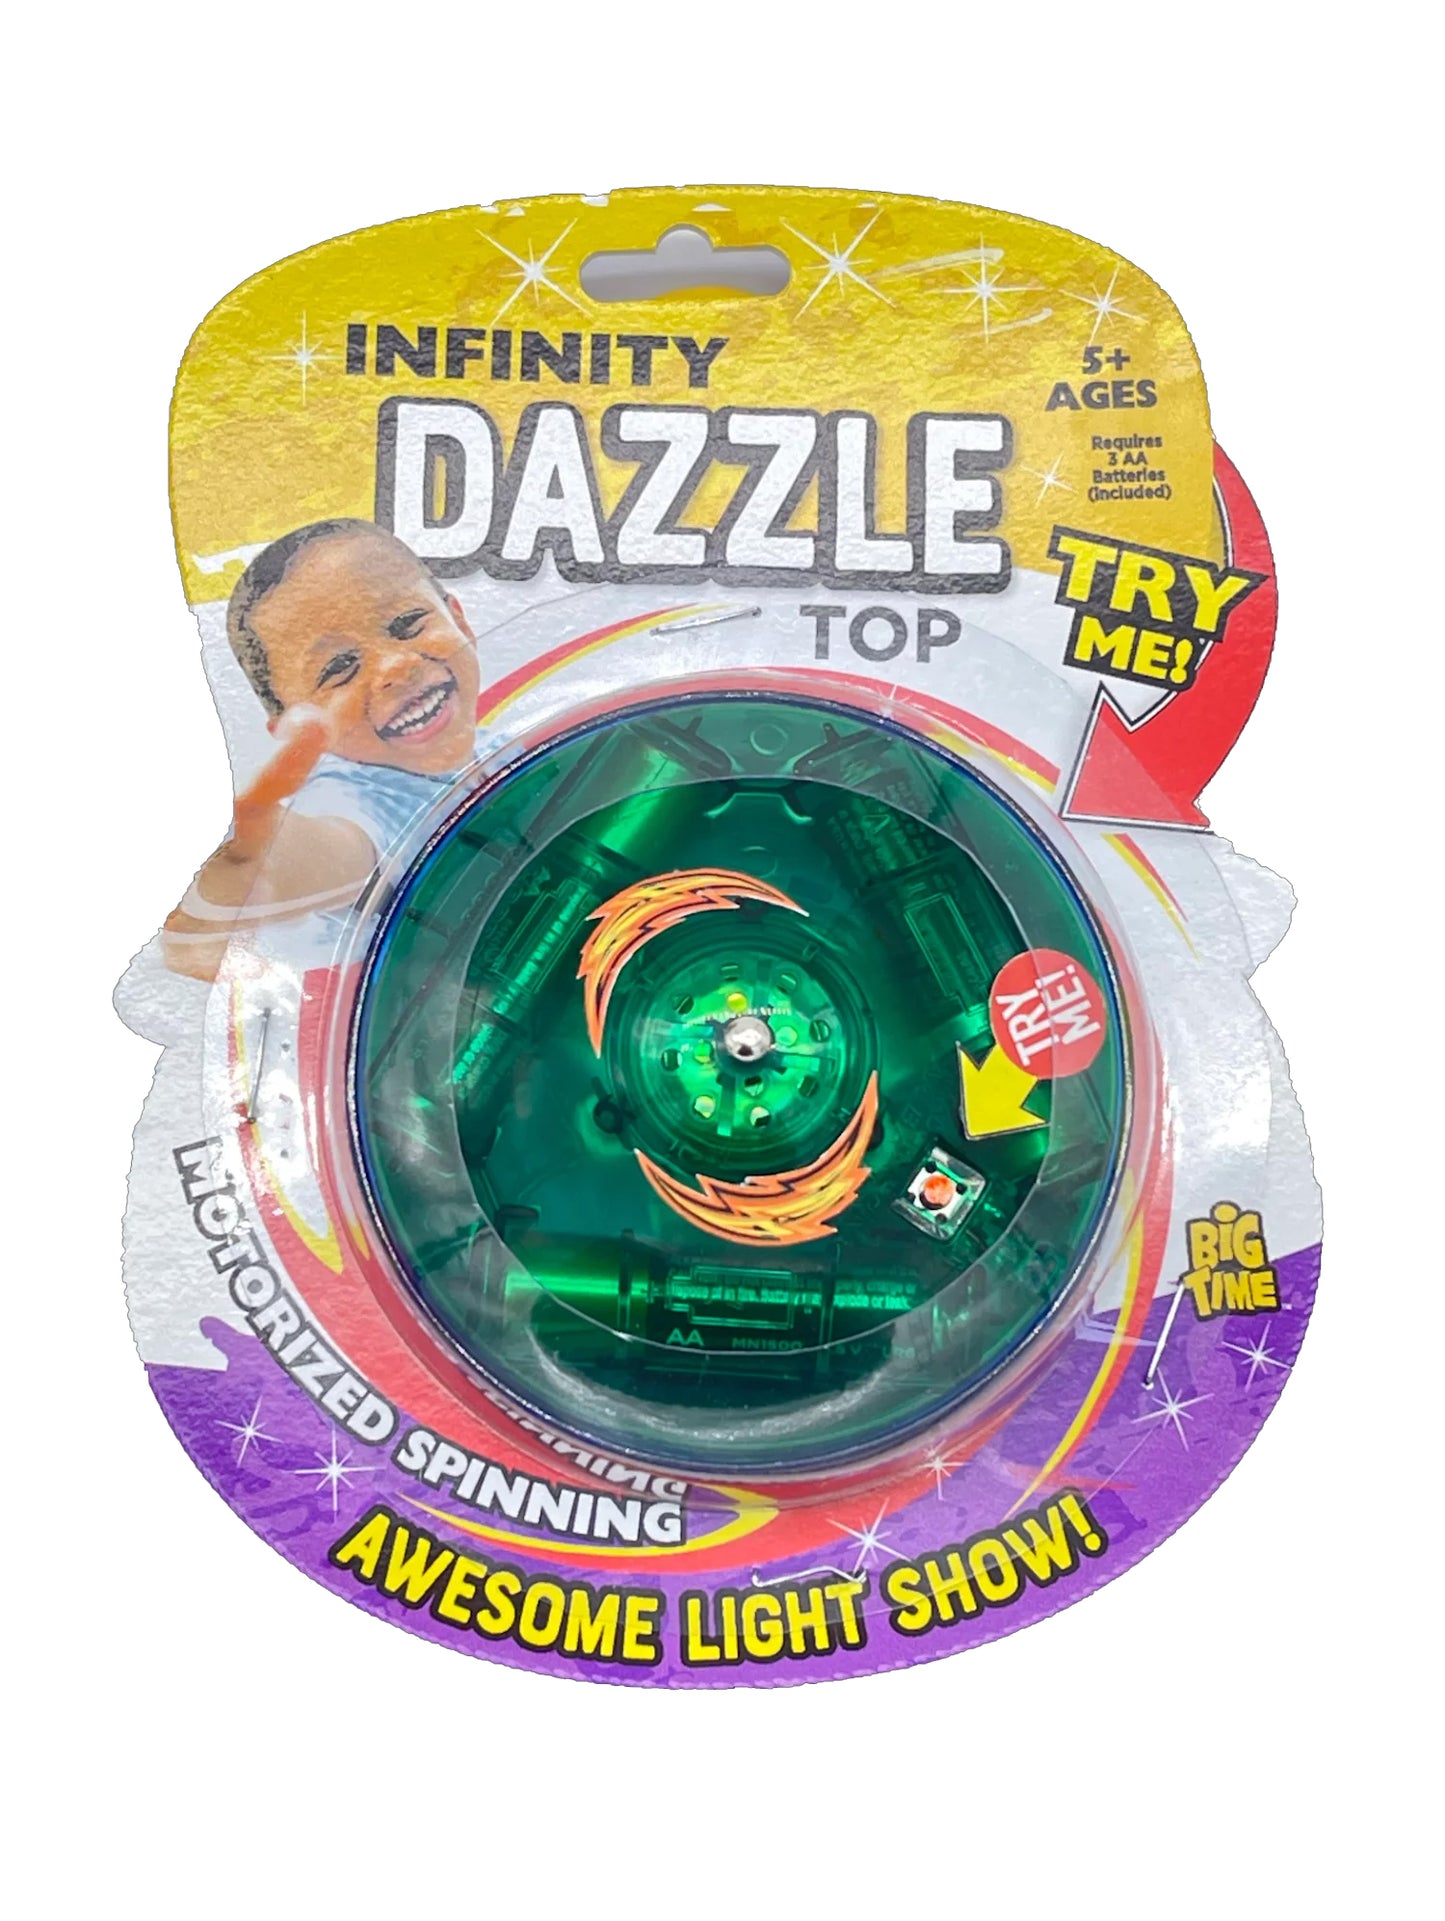 Infinity Dazzle Top Fidget Spinner Toy - LED Lights Spinner Fidget Toys for Adults and Kids (1 Random Color Pick)